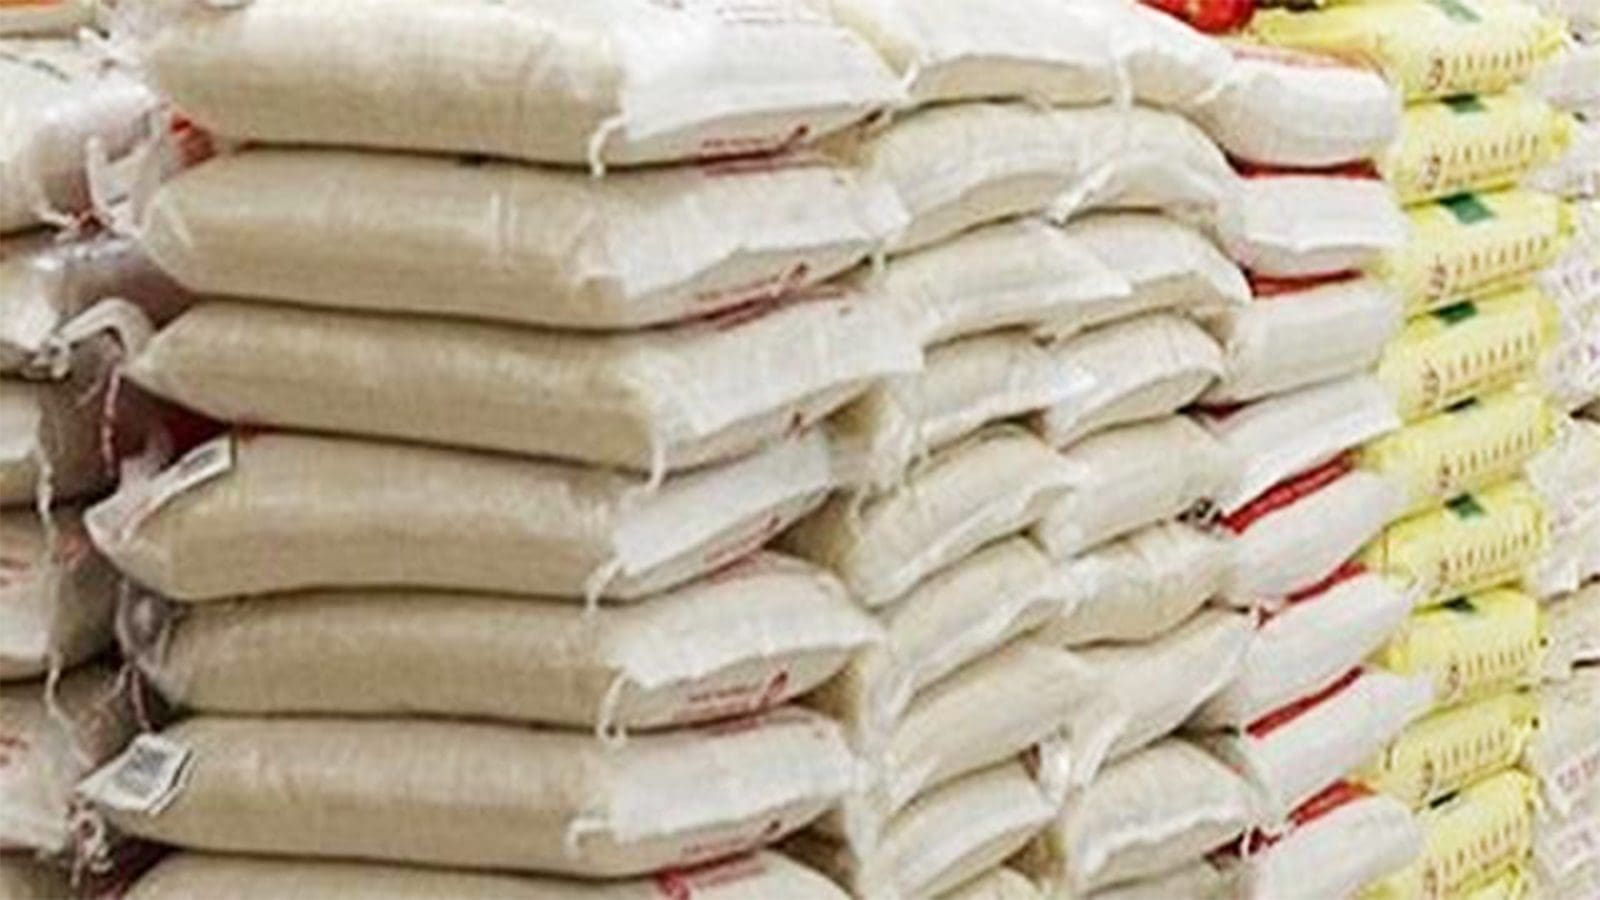 Nigeria Customs Service impounds 7,250 bags of contaminated rice